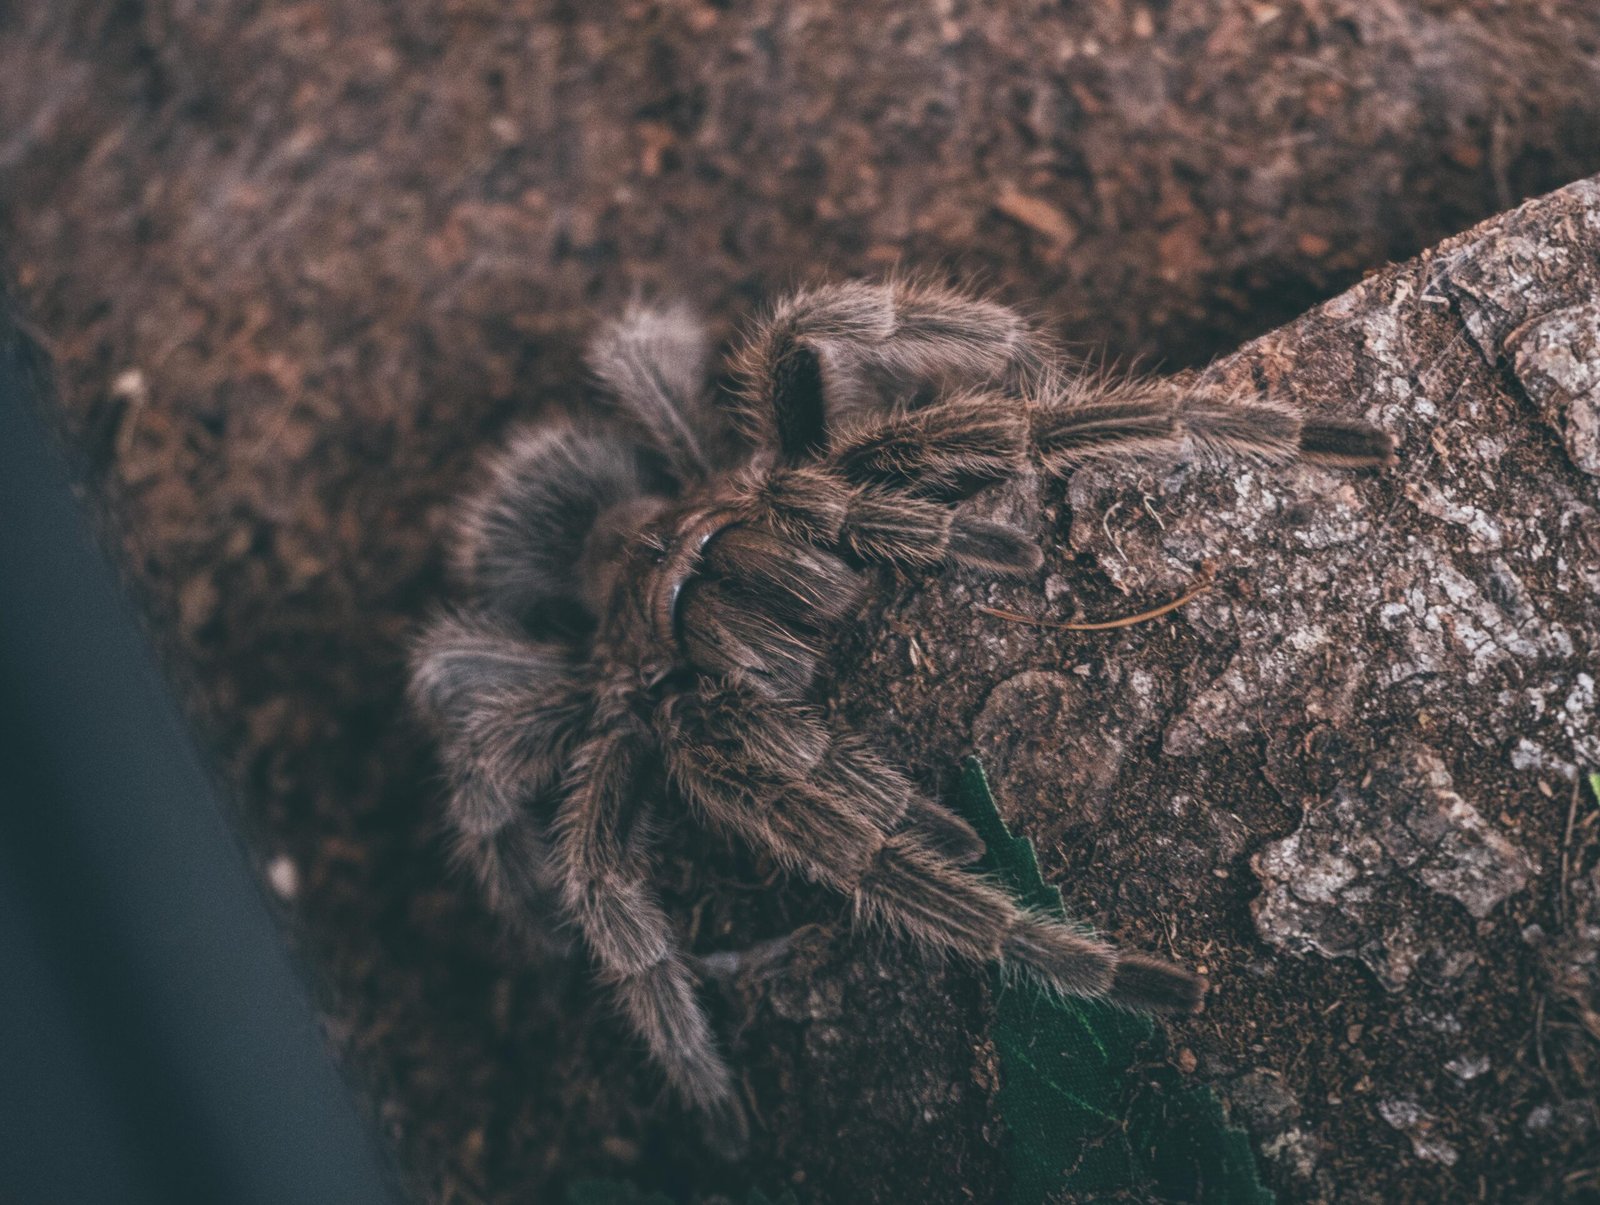 What Is The Recommended Frequency For Changing A Tarantulas Substrate In A Bioactive Setup?